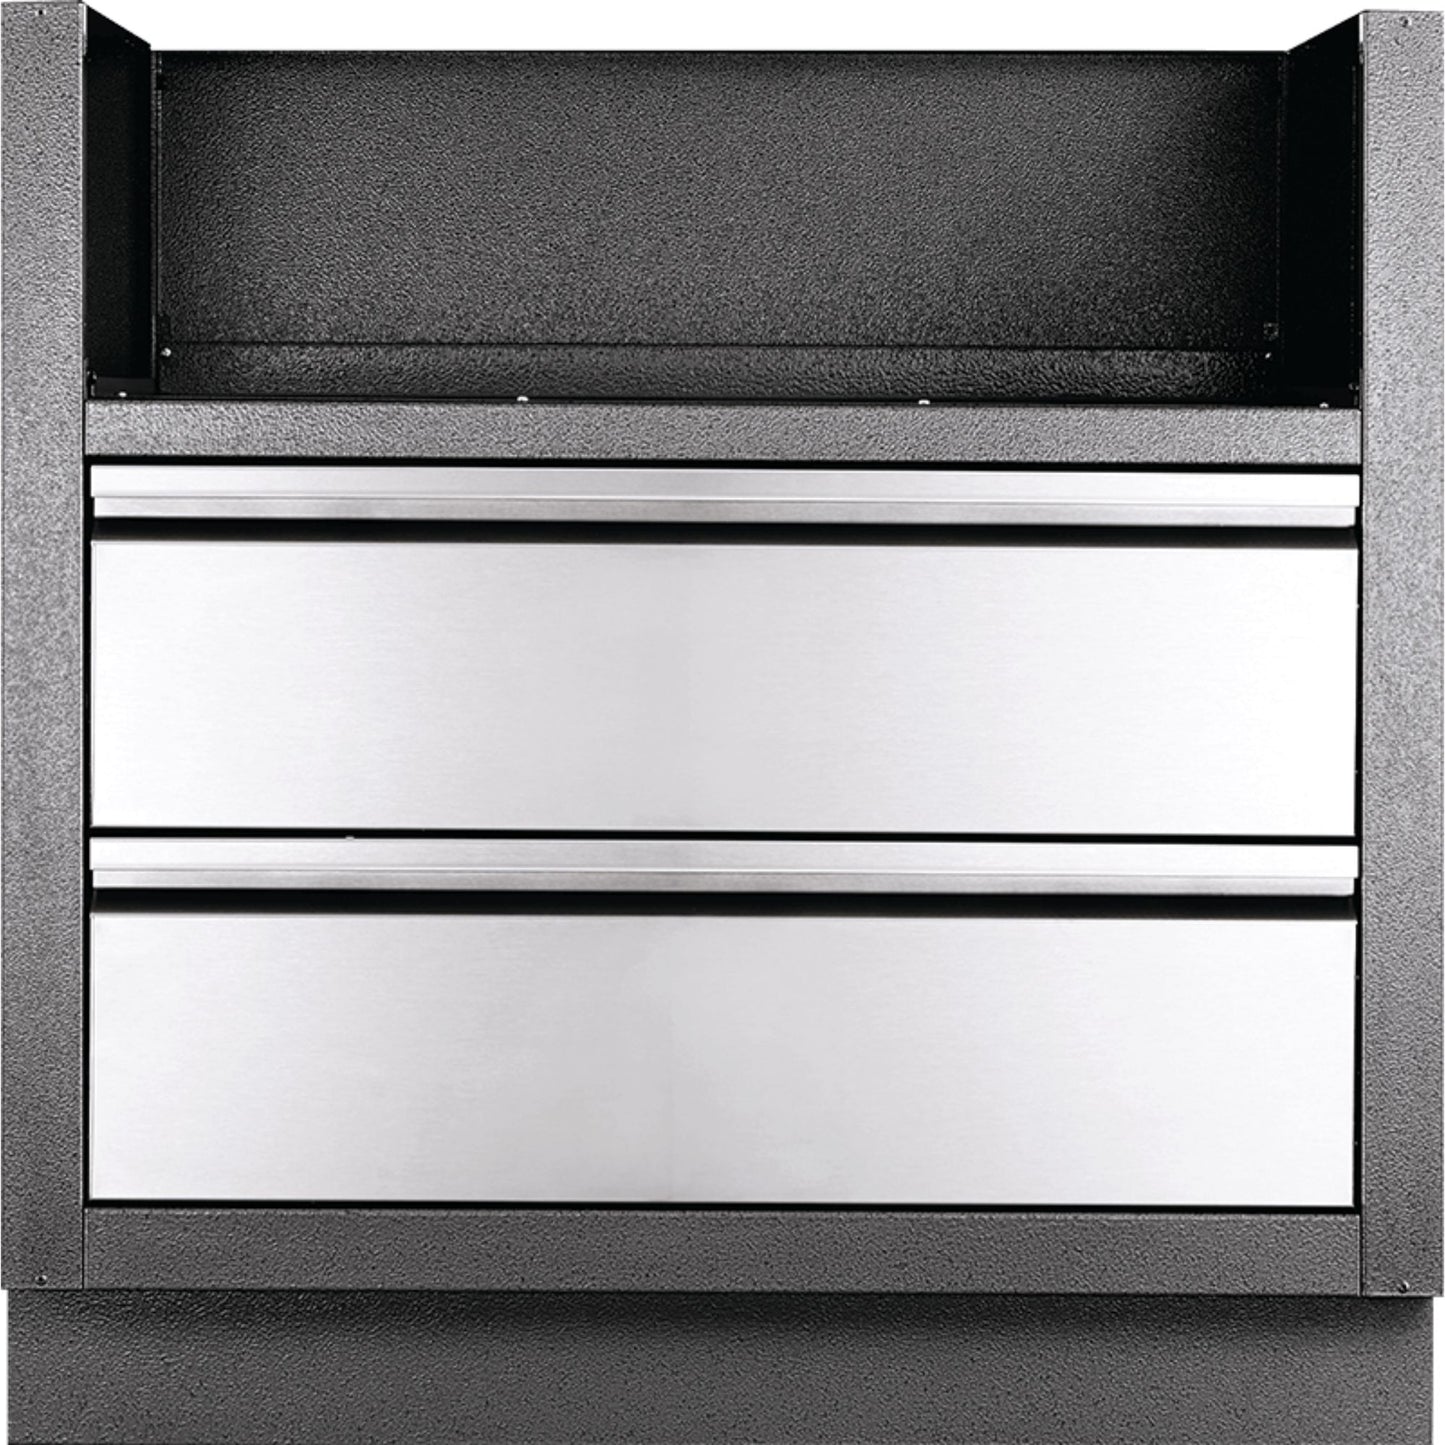 Napoleon Oasis Grill Cabinet For Built-In 32" Grill IM-UGC32-CN